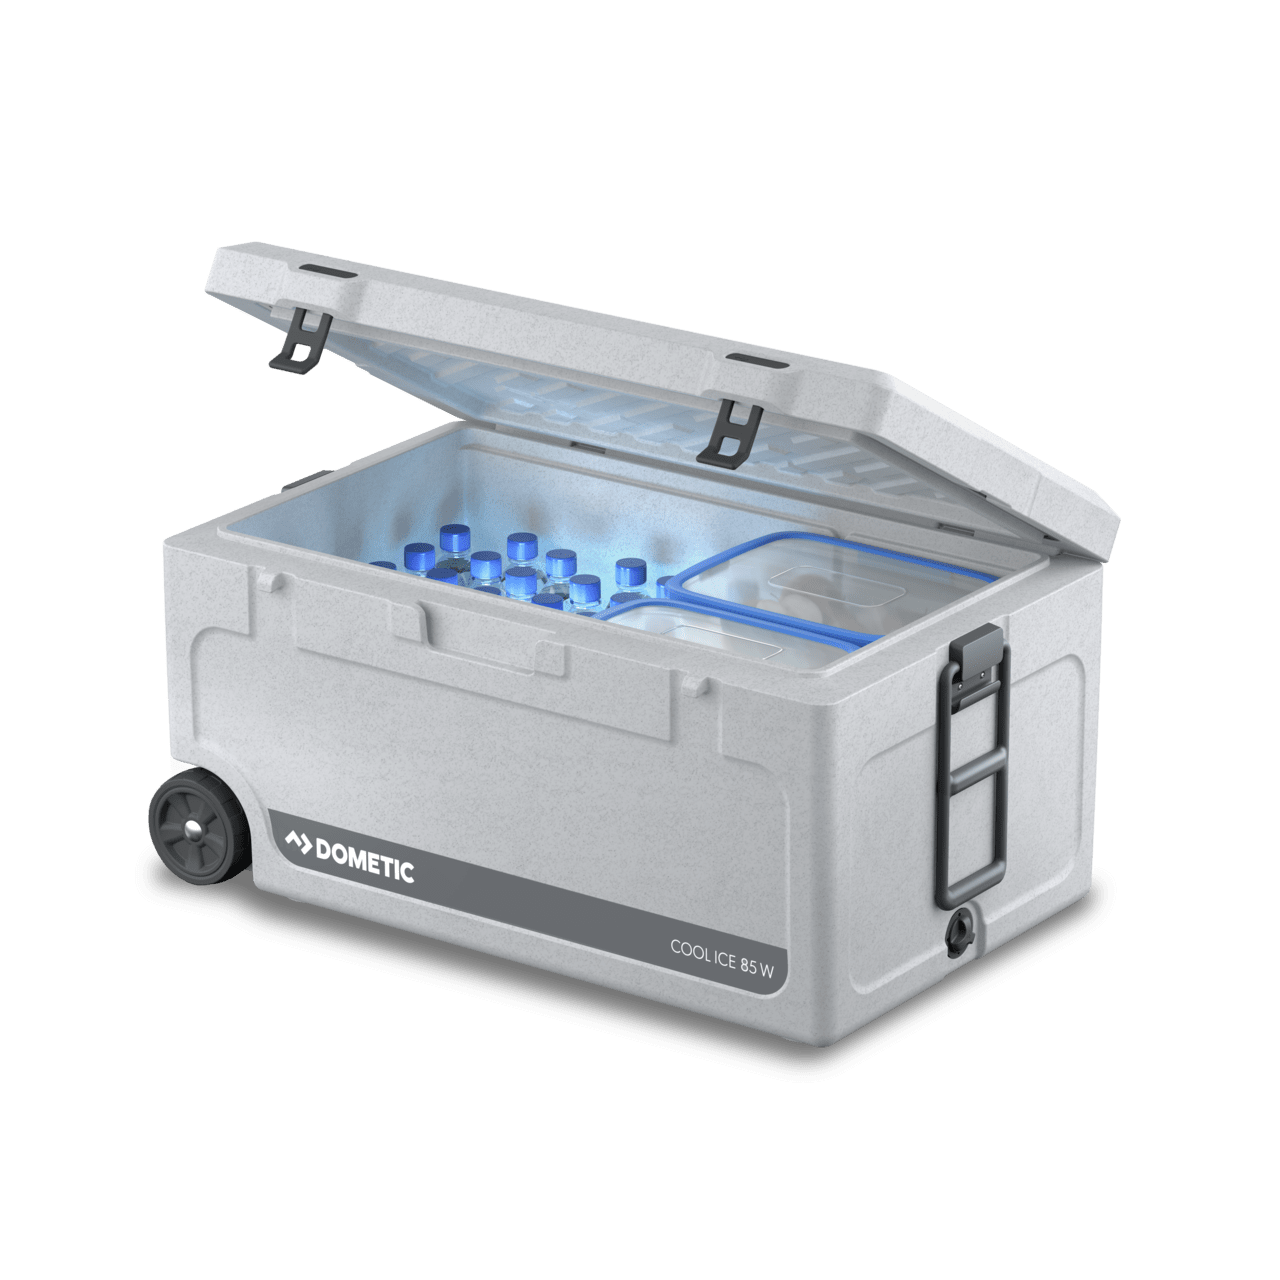 Dometic Cool Ice 86 l CI rotomoulded icebox